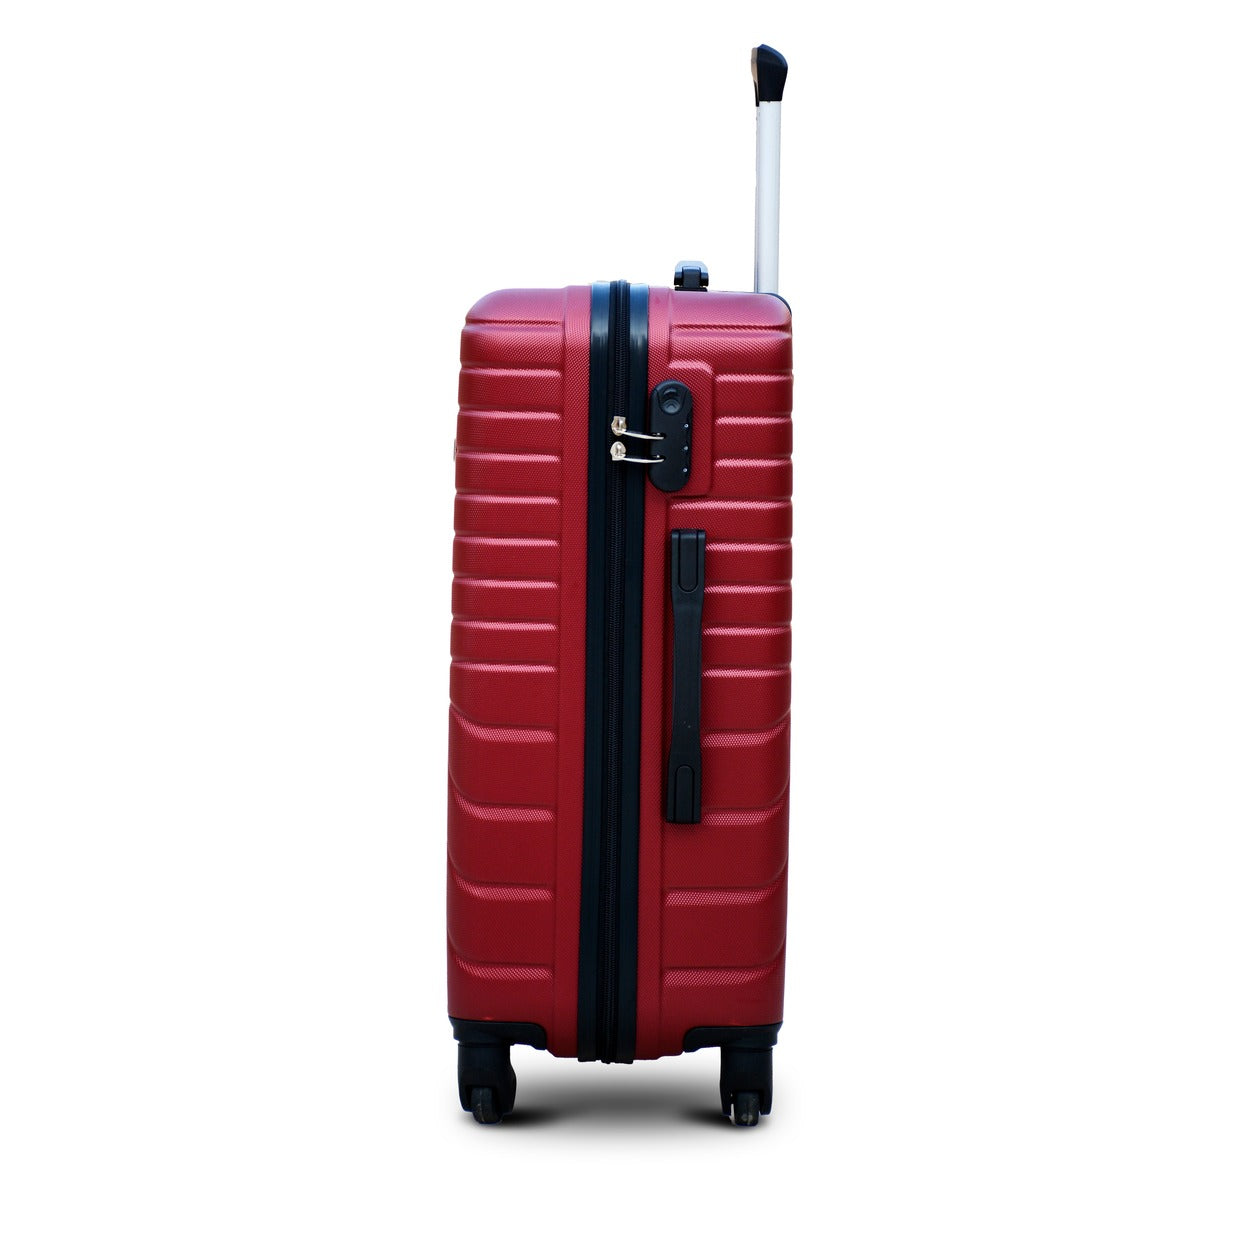 20" Red Colour SJ ABS Carry On Luggage Lightweight Hard Case Trolley Bag